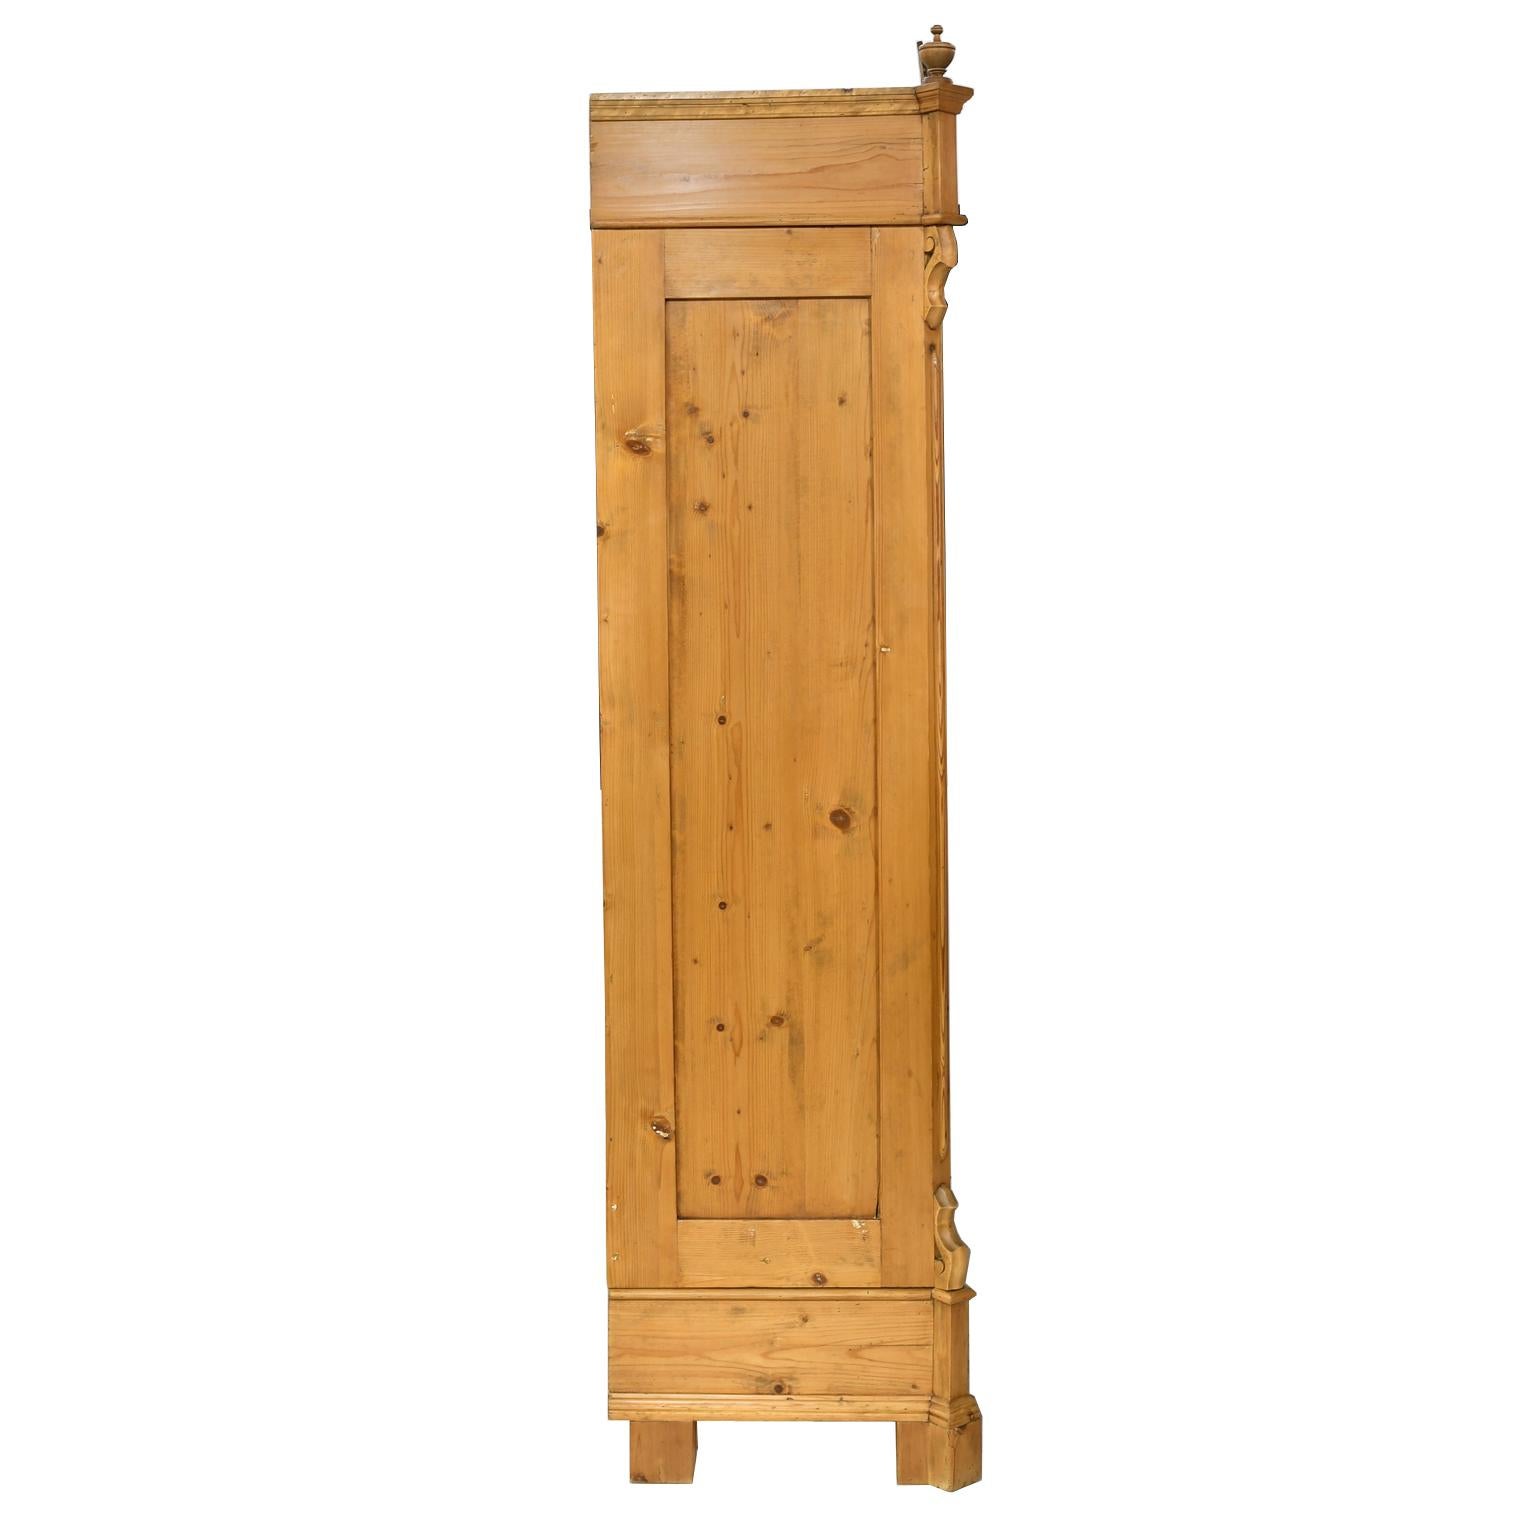 German 19th Century Louis Philippe Armoire in European Pine with Carved Bonnet, c. 1860